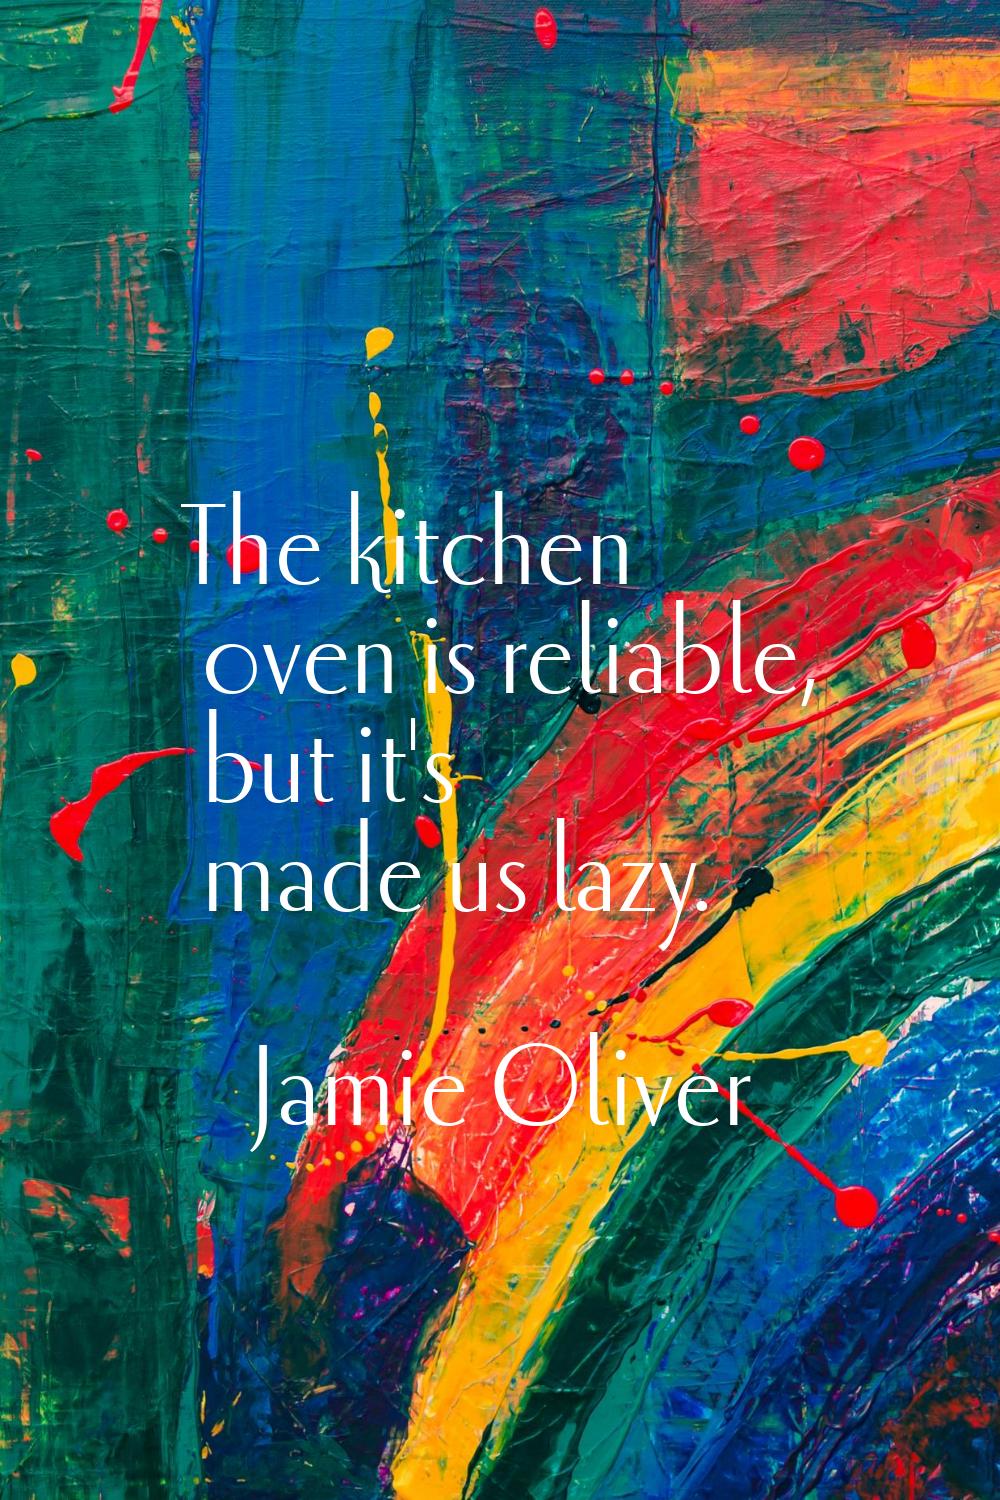 The kitchen oven is reliable, but it's made us lazy.